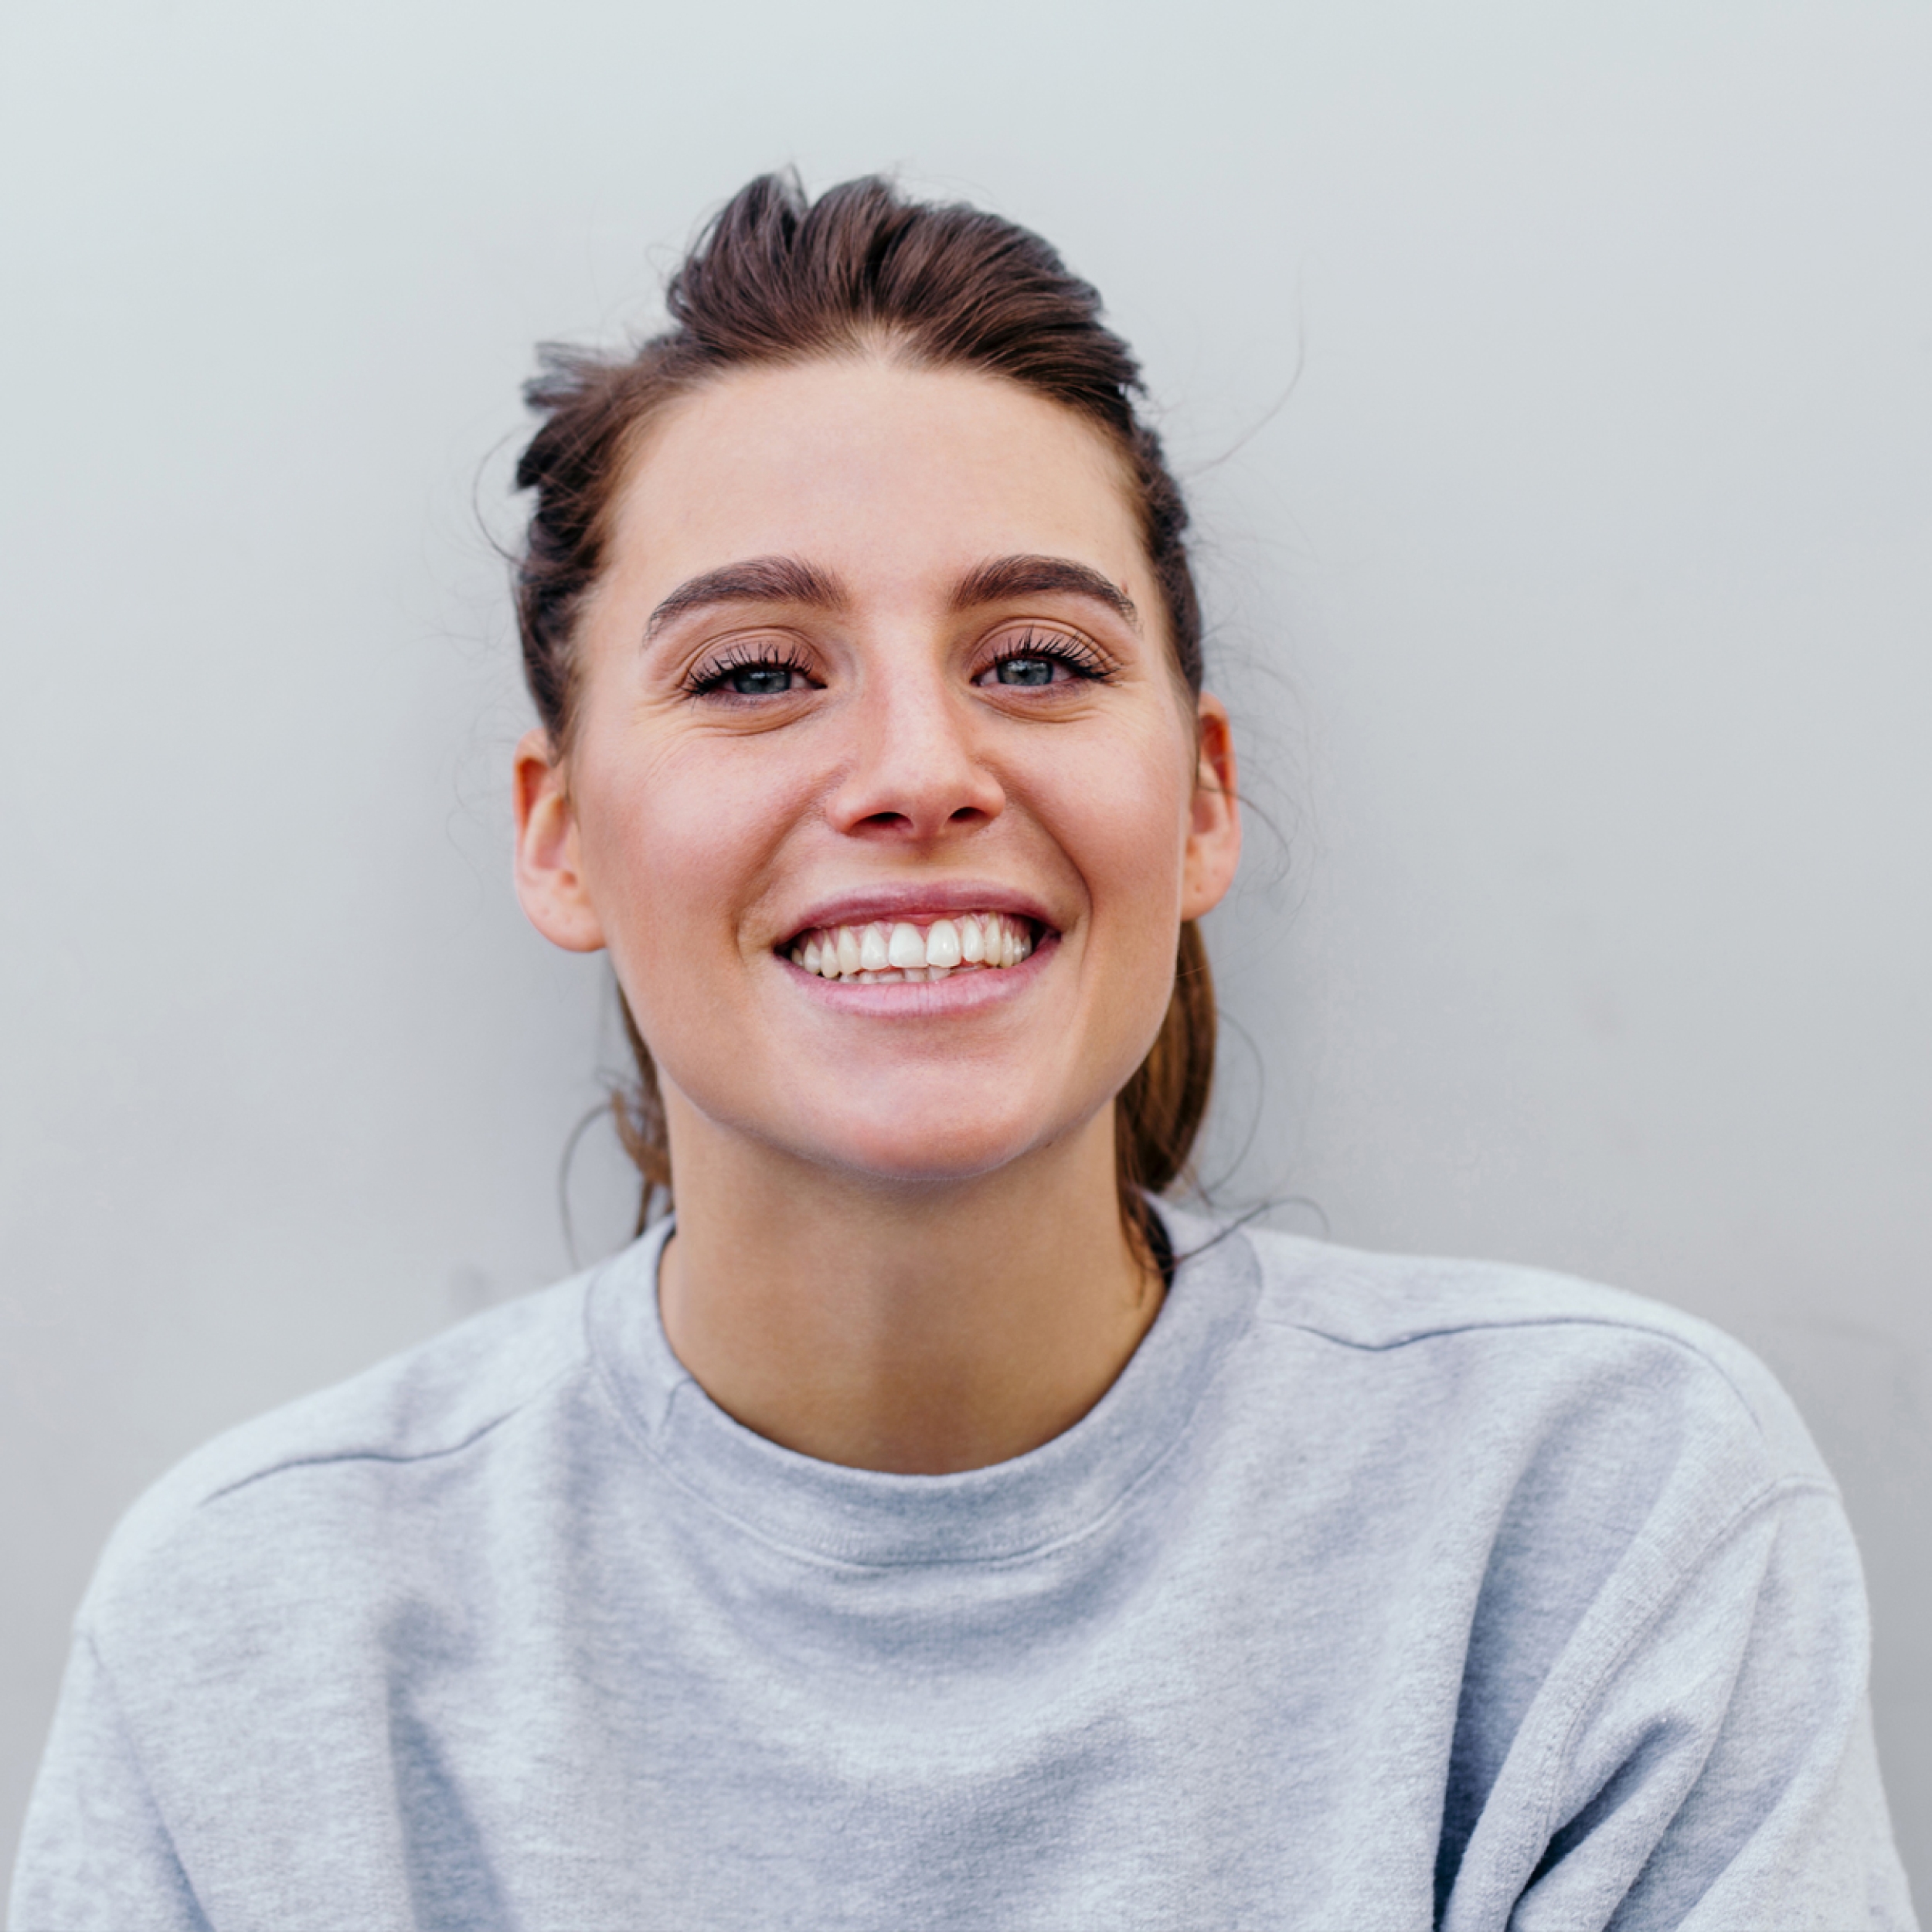 Image of a young attractive woman wearing a grey sweater and smiling at the camera.